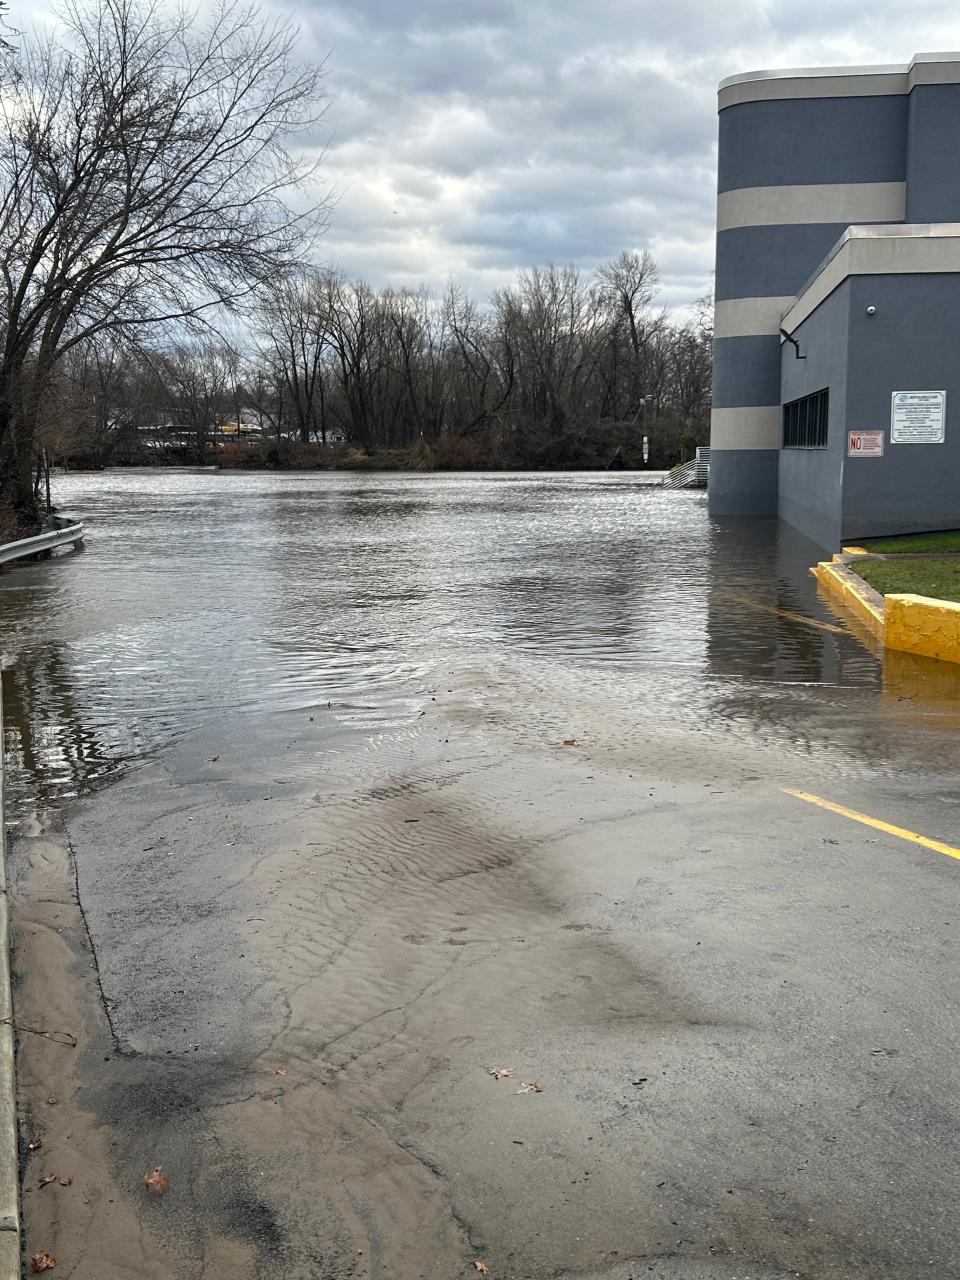 The flooded parking lot of the Boys & Girls Club in Lodi